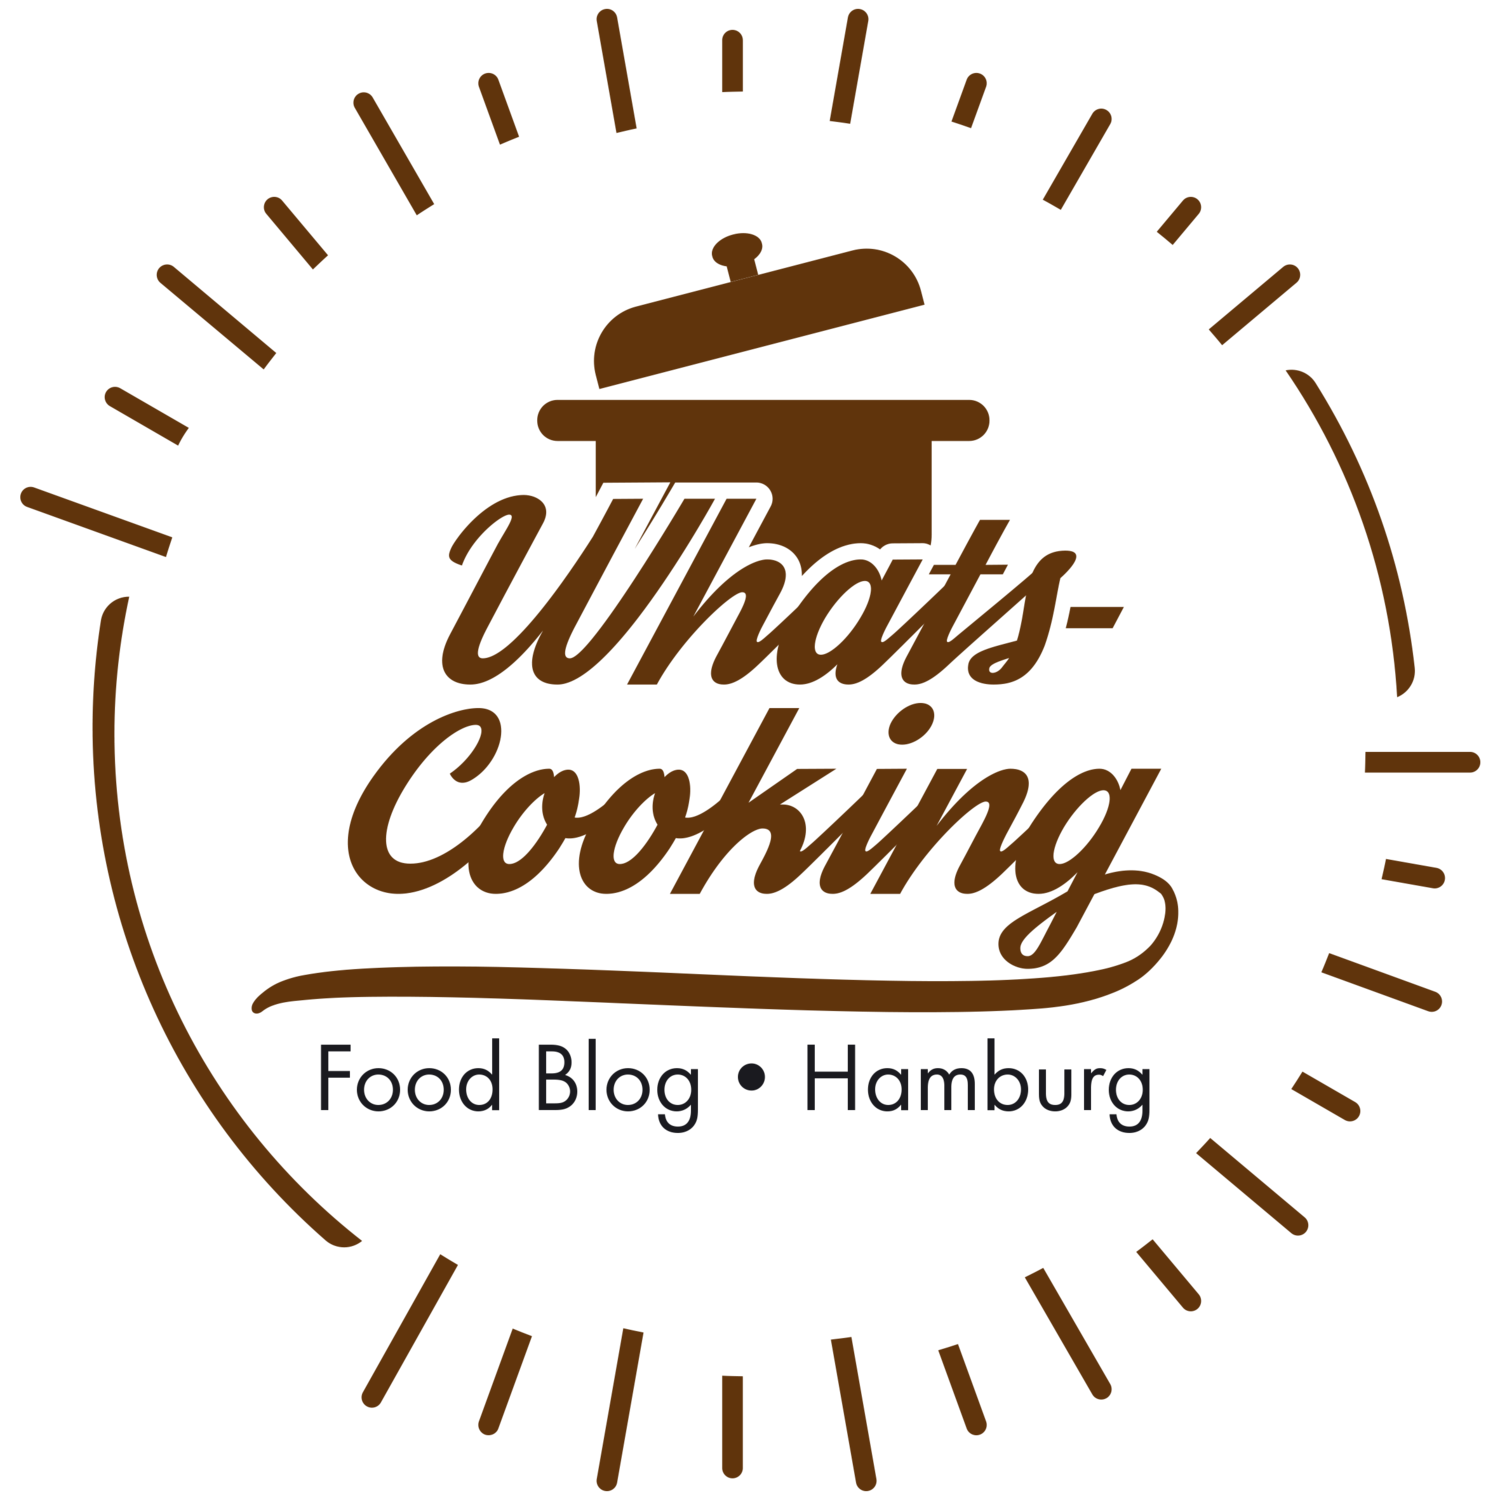 (c) Whats-cooking.com